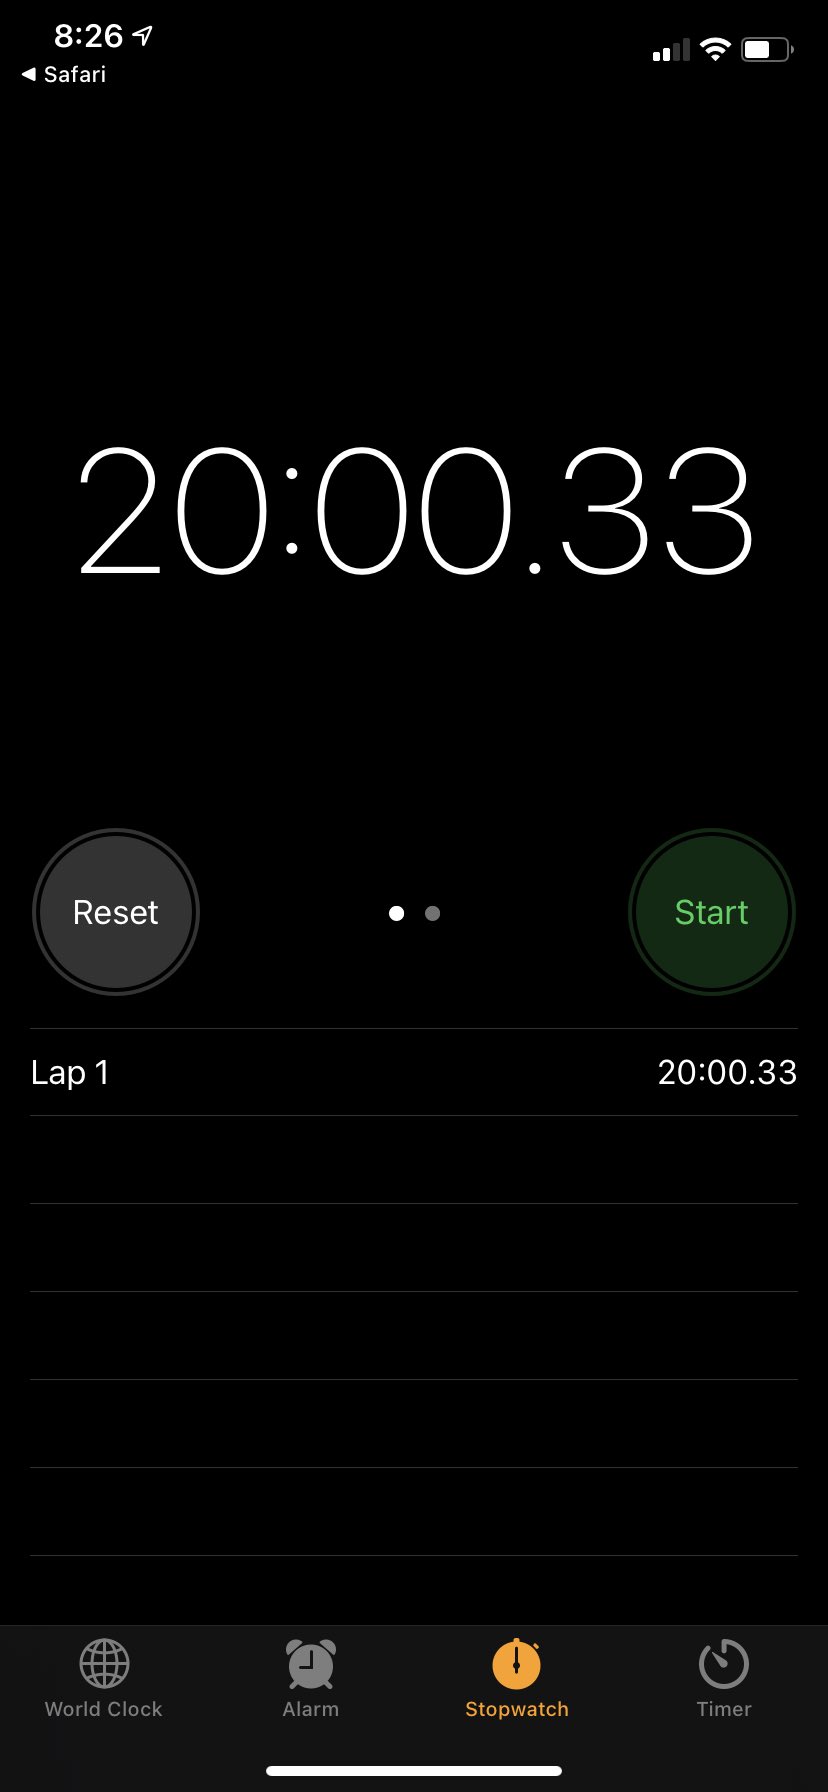 Joel Kurz Twitter: "Stopwatch. Best reading tool! Reading for 20 a day will allow you to read 15-25 books a year. Turn on your phone's stopwatch and read in